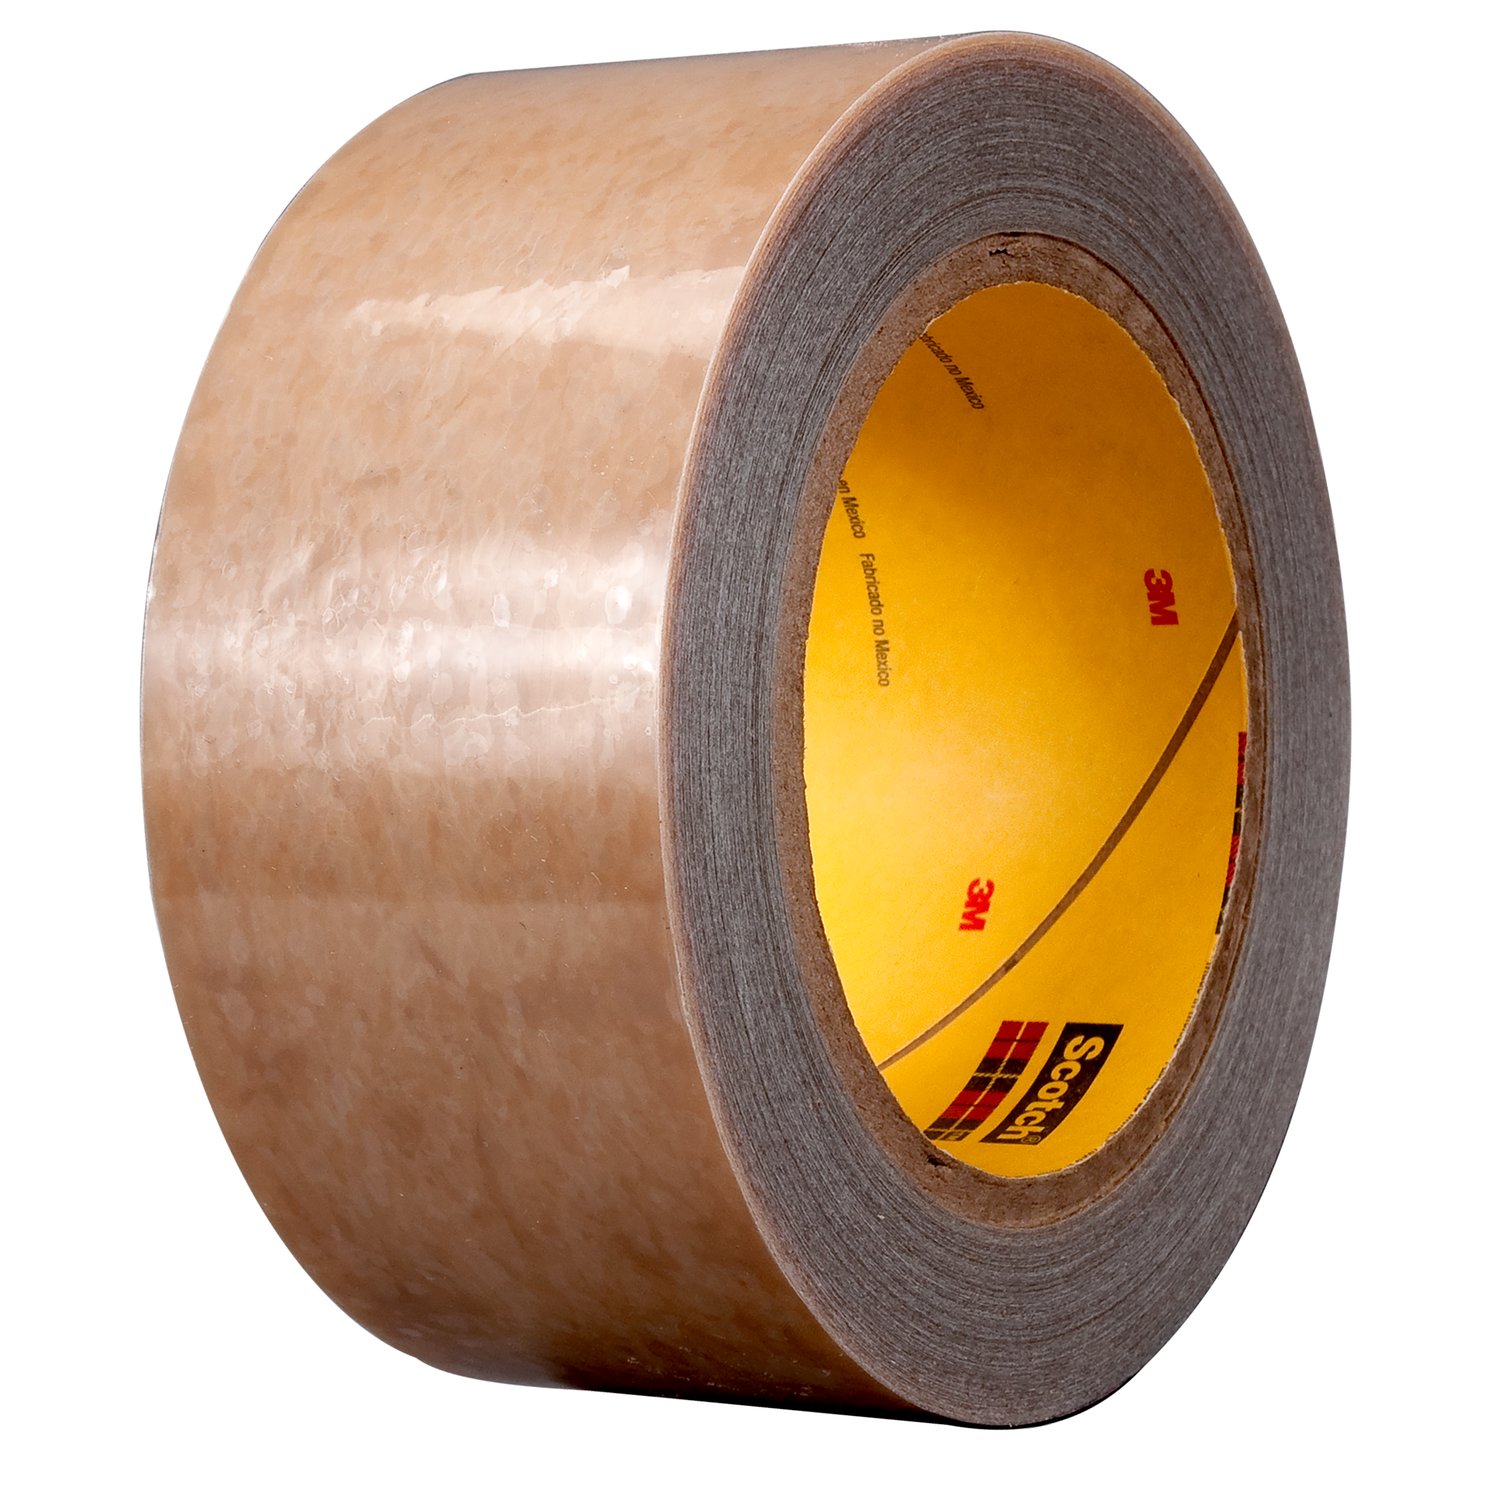 7010045103 - 3M Polyester Protective Tape 336, Transparent, 3 in x 144 yd, 1.5 mil, 3 rolls per case